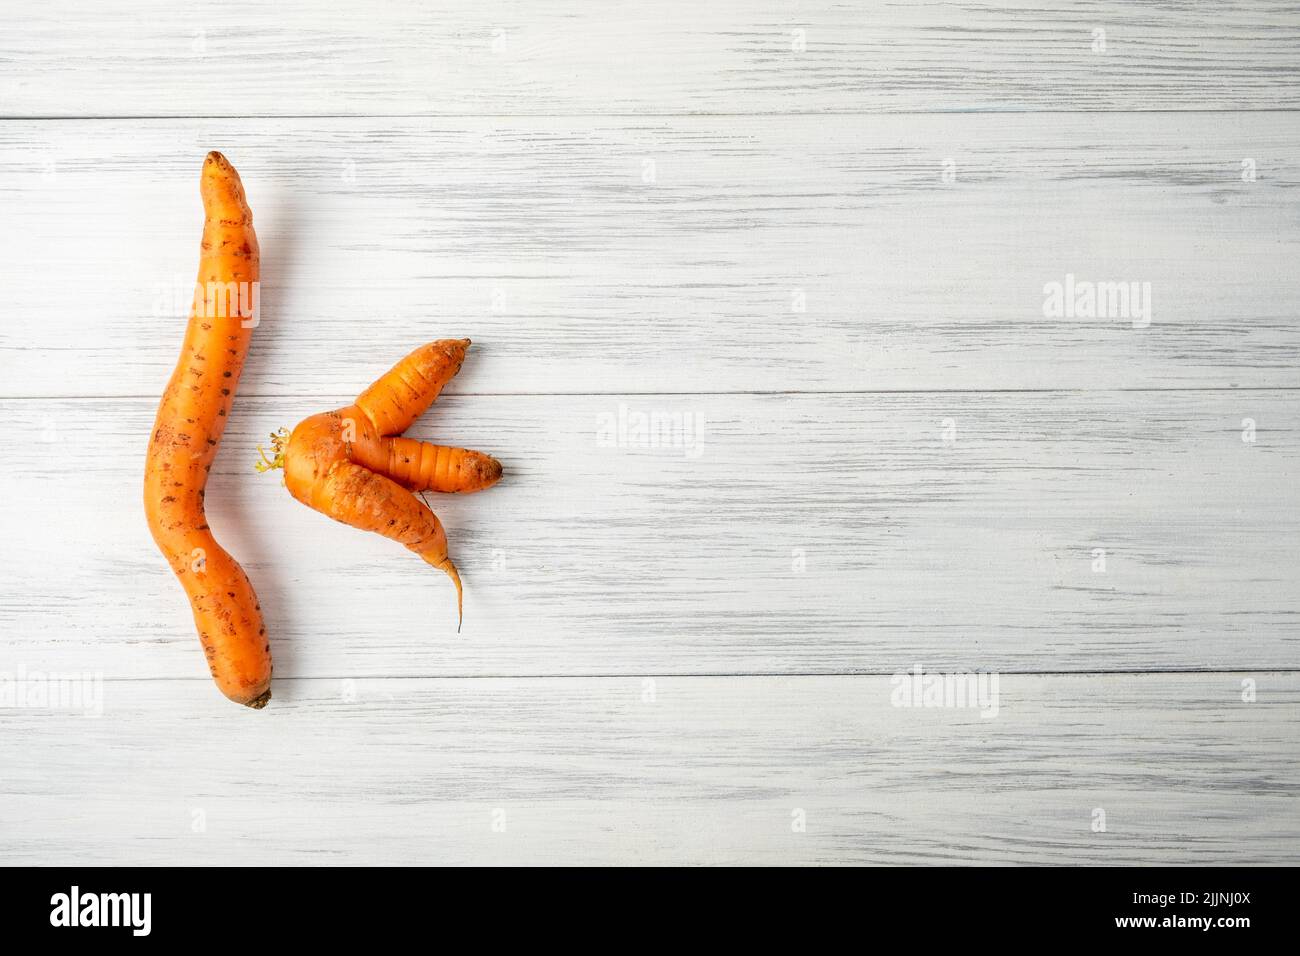 Top view close-up of two ripe orange ugly carrots lie on a light wooden surface with copy space for text. Selective focus. Stock Photo